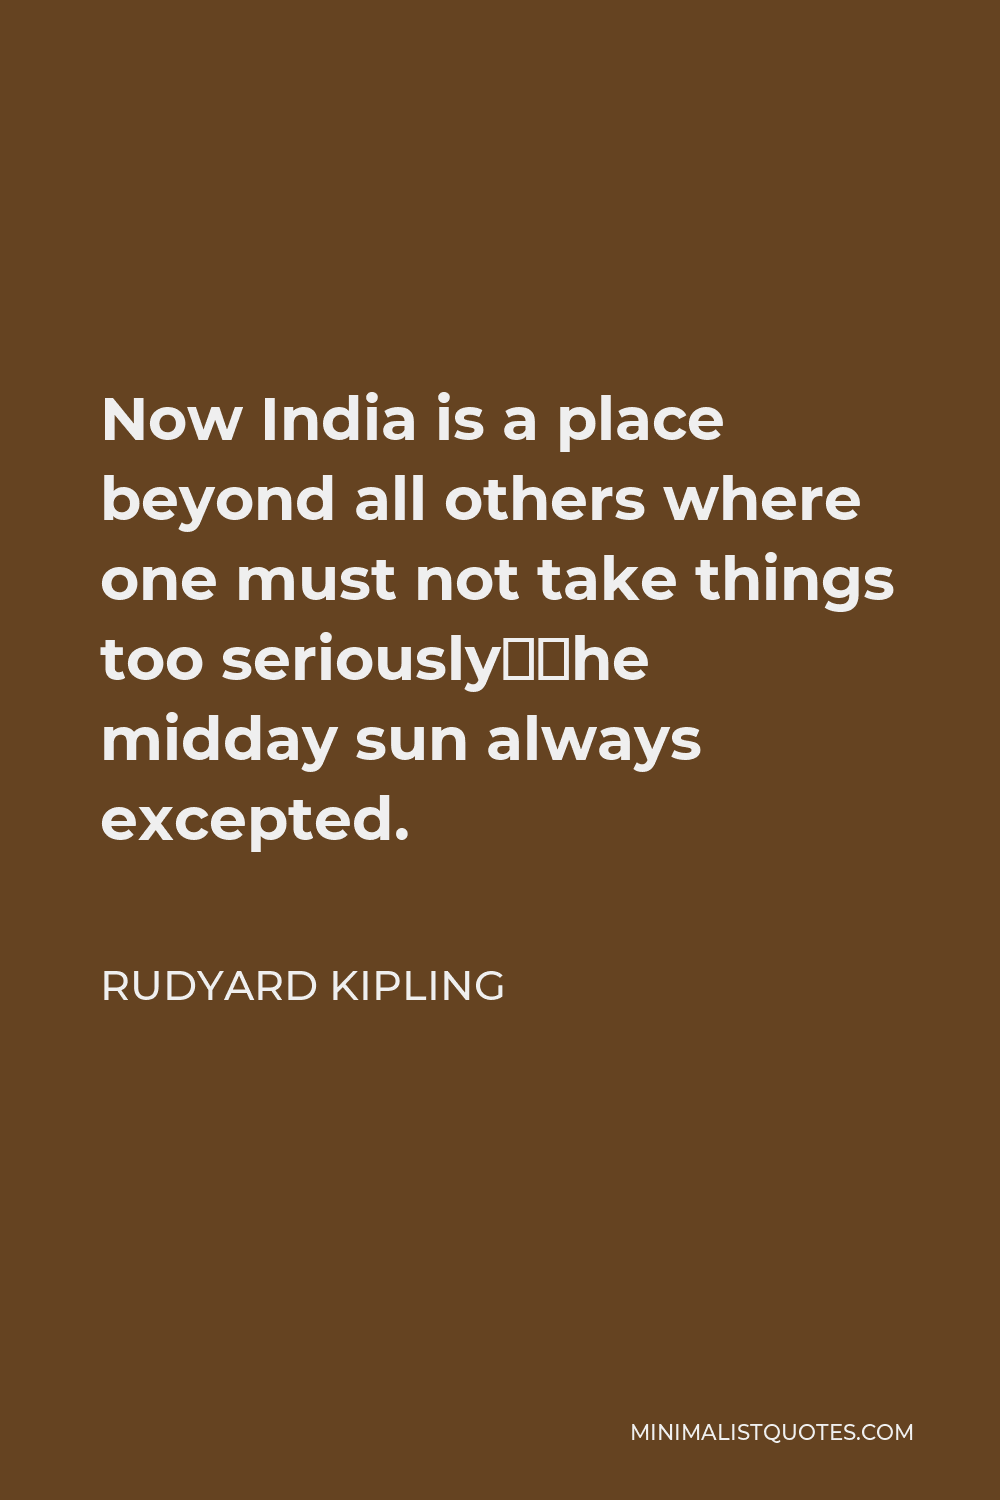 Rudyard Kipling Quote - Now India is a place beyond all others where one must not take things too seriously—the midday sun always excepted.